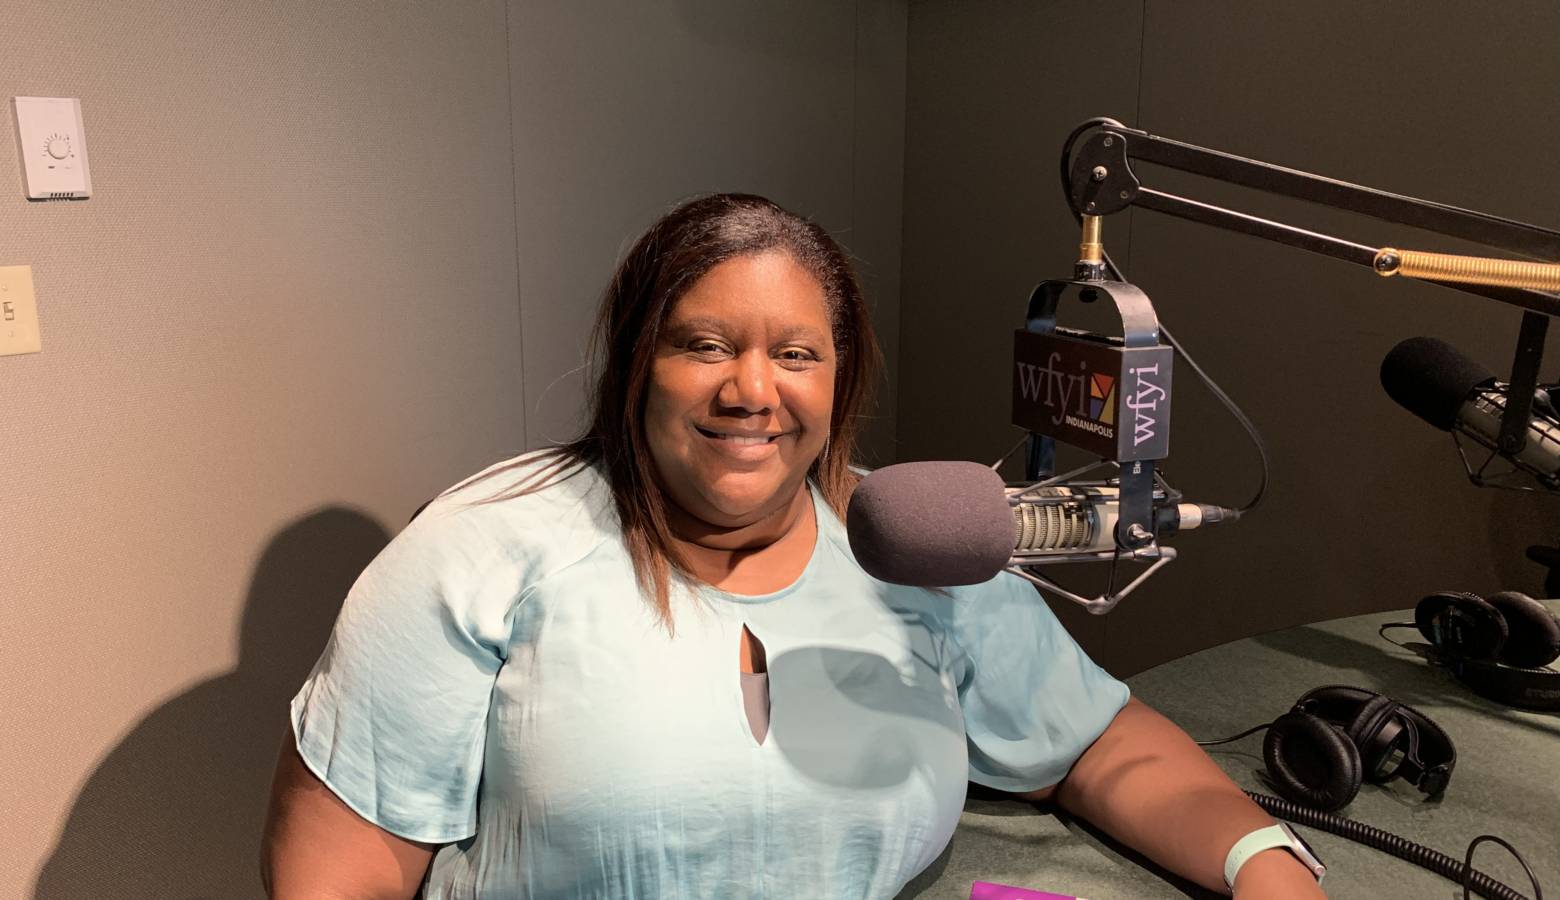 The Indiana Re-Entry Program is run by CareSource, one of the health care companies that the state contracts with to provide Medicaid. Care Source medical director Dr. Cameual Wright gave an overview of the program. (Jill Sheridan/IPB News)